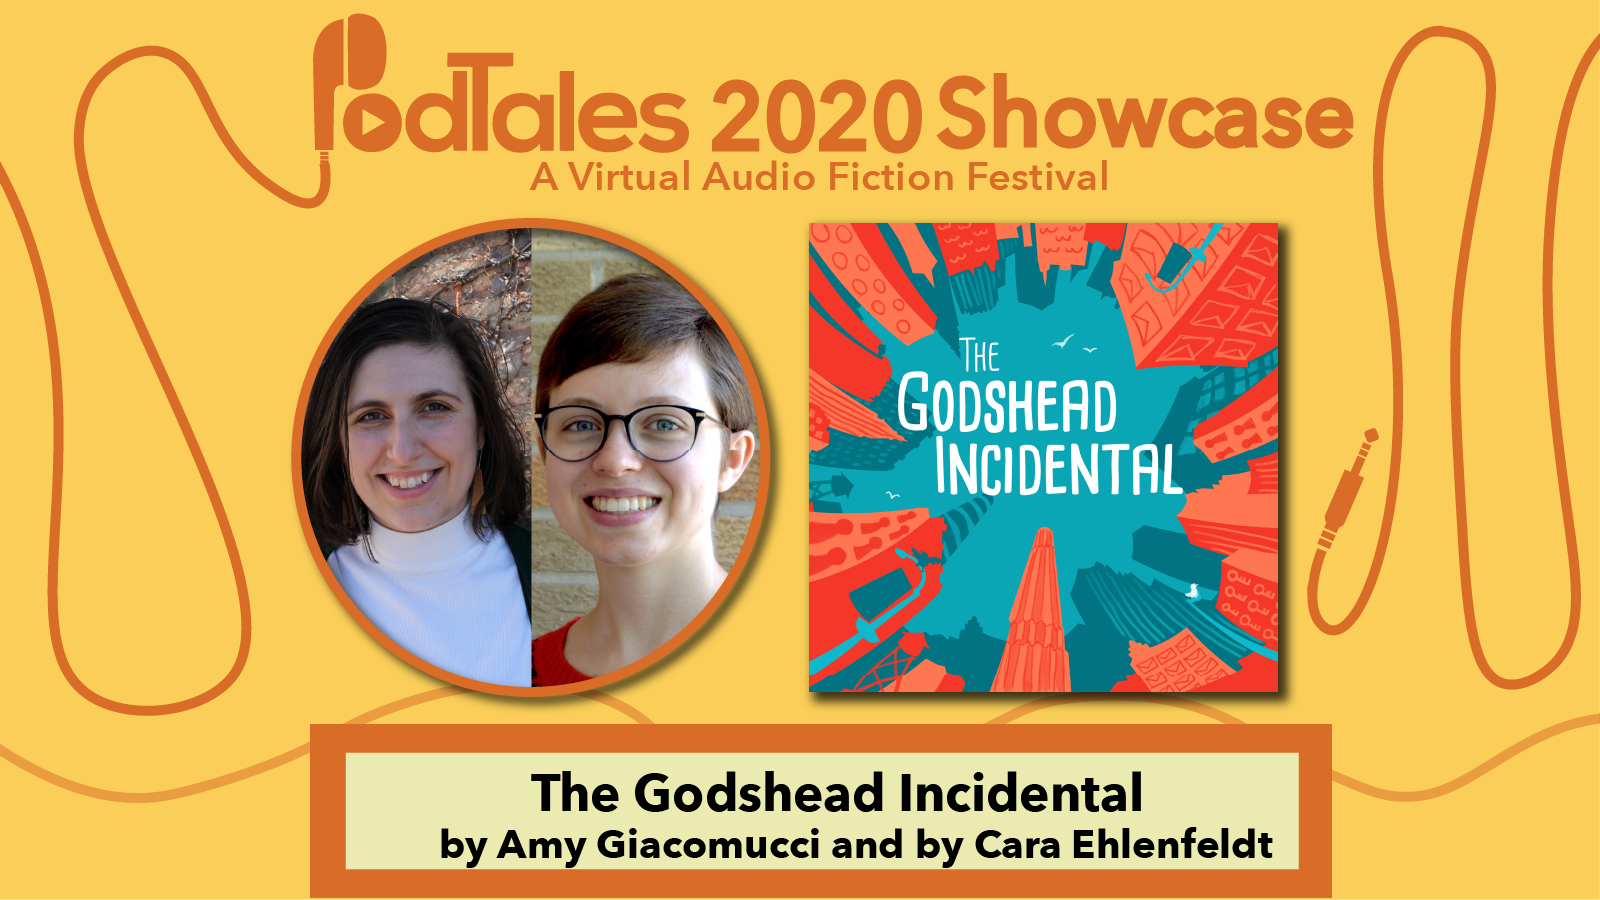 Text reading “PodTales 2020 Showcase: A Virtual Audio Fiction Festival”, Photo of Amy Giacomucci and Cara Ehlenfeldt, Show Art for The Godshead Incidental, Text reading “The Godshead Incidental by Any Giacomucci and by Cara Ehlenfeldt”